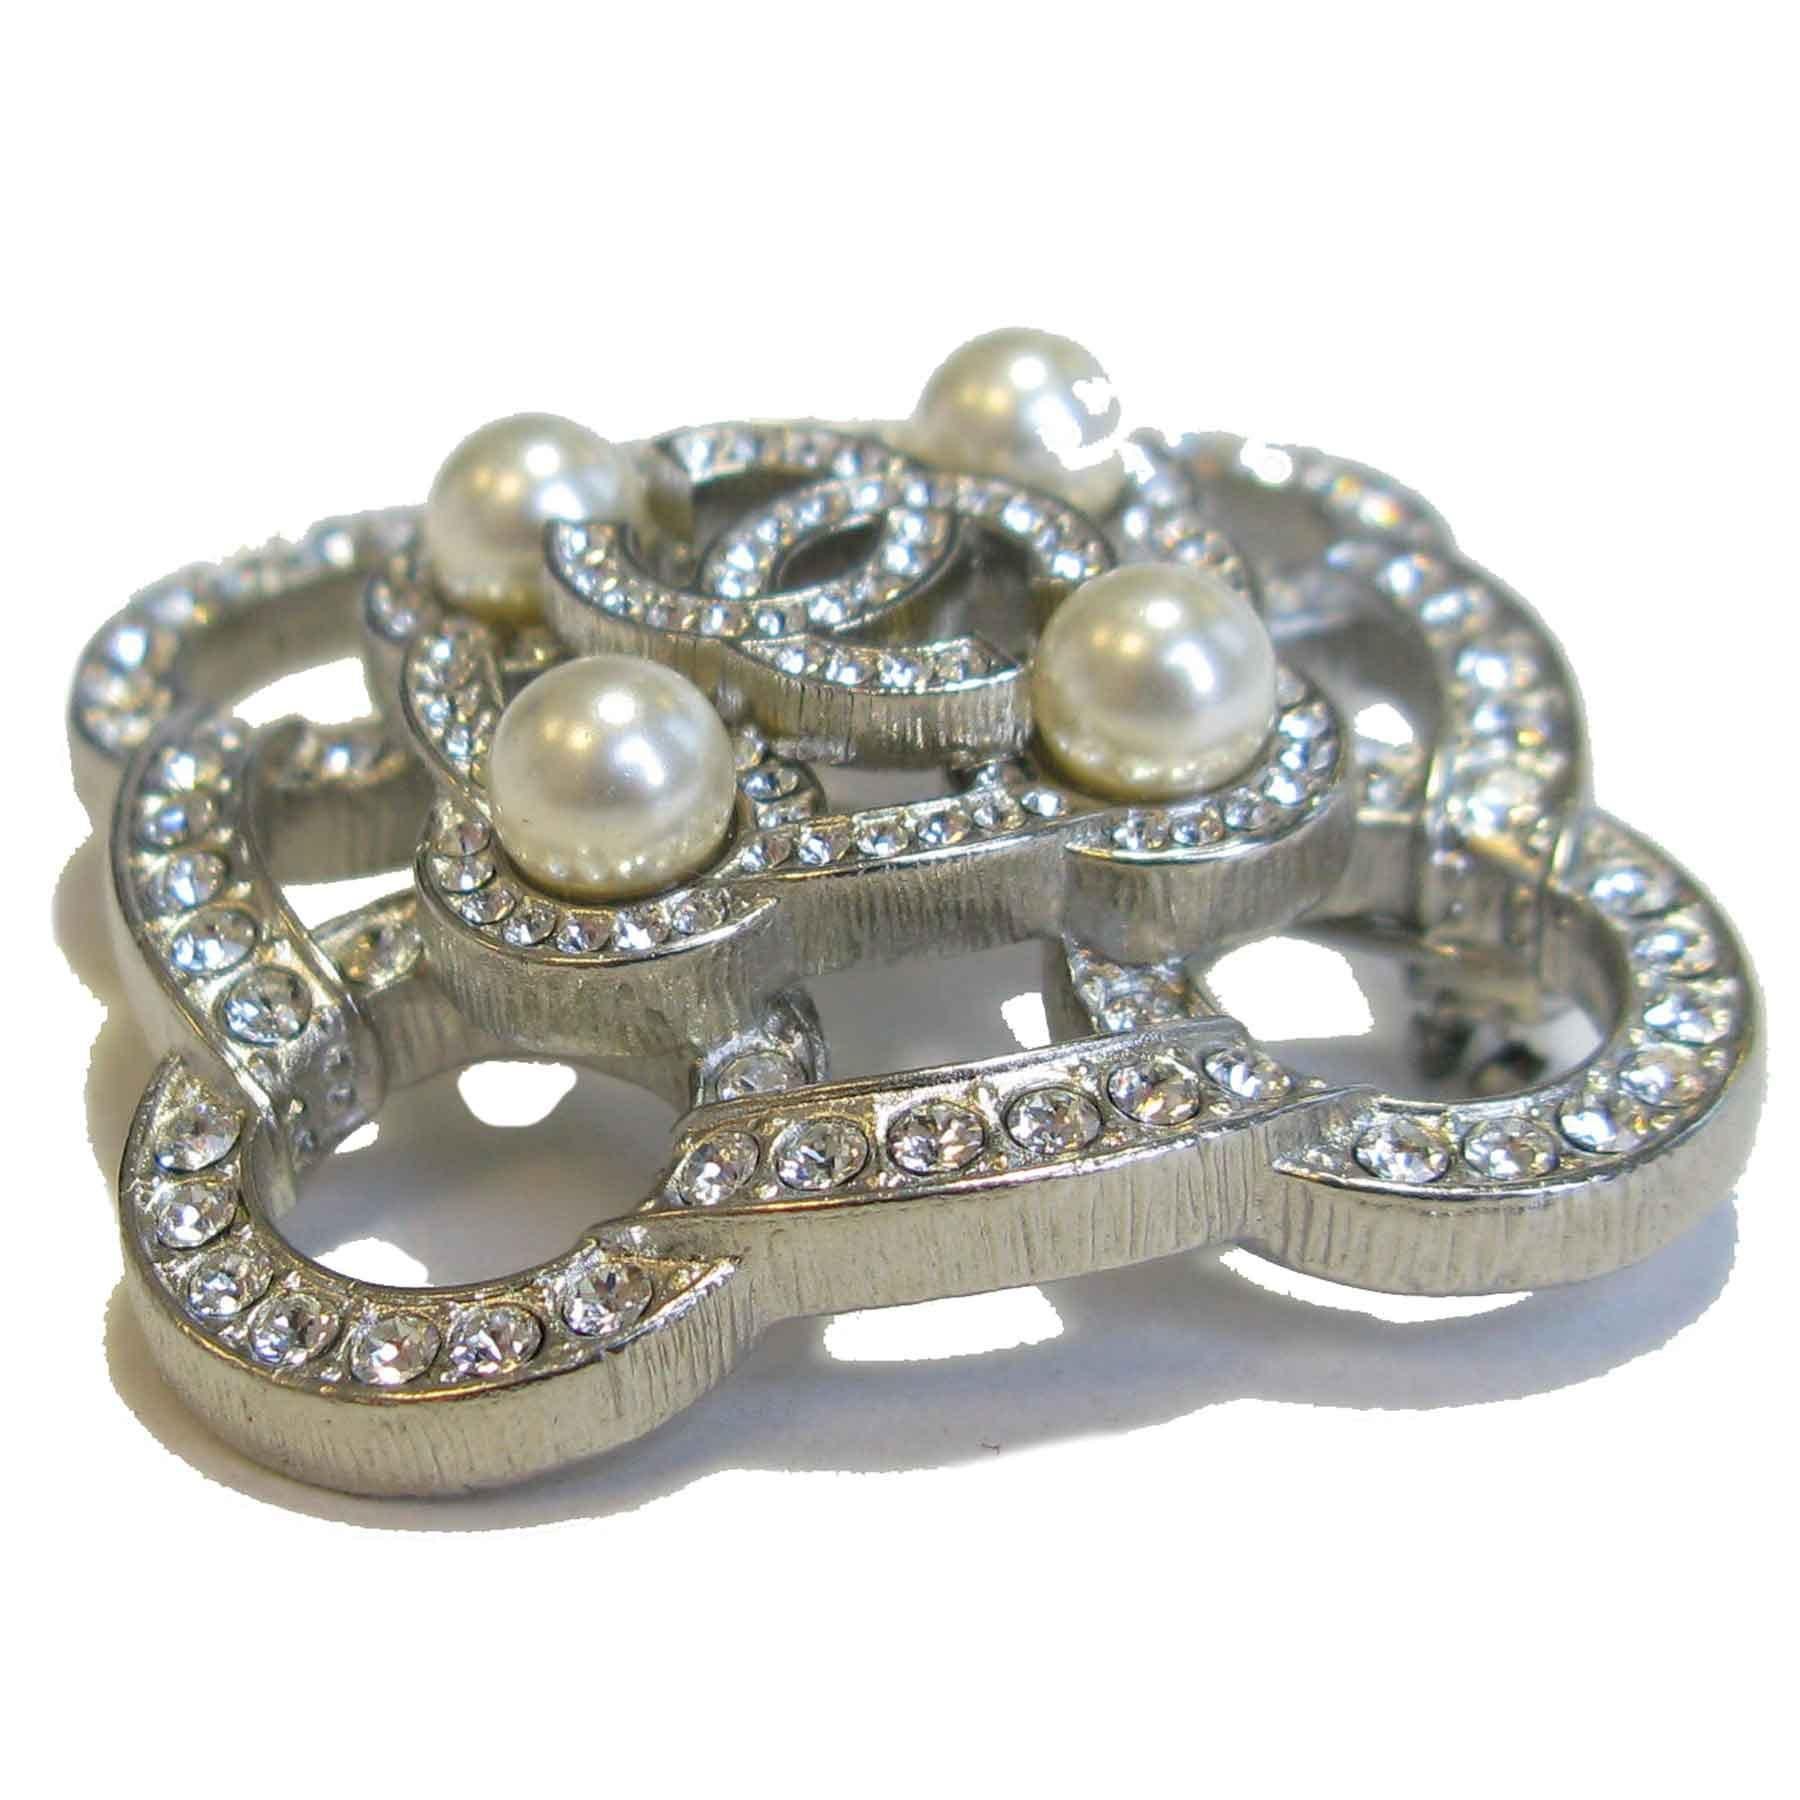 Elegant brooch from Chanel in silver metal with strass and pearls

Condition: never worn
Made in France
Set with pearls and strass of two different size. Beautiful CC in strass in the middle
Dimensions: 5x5 cm